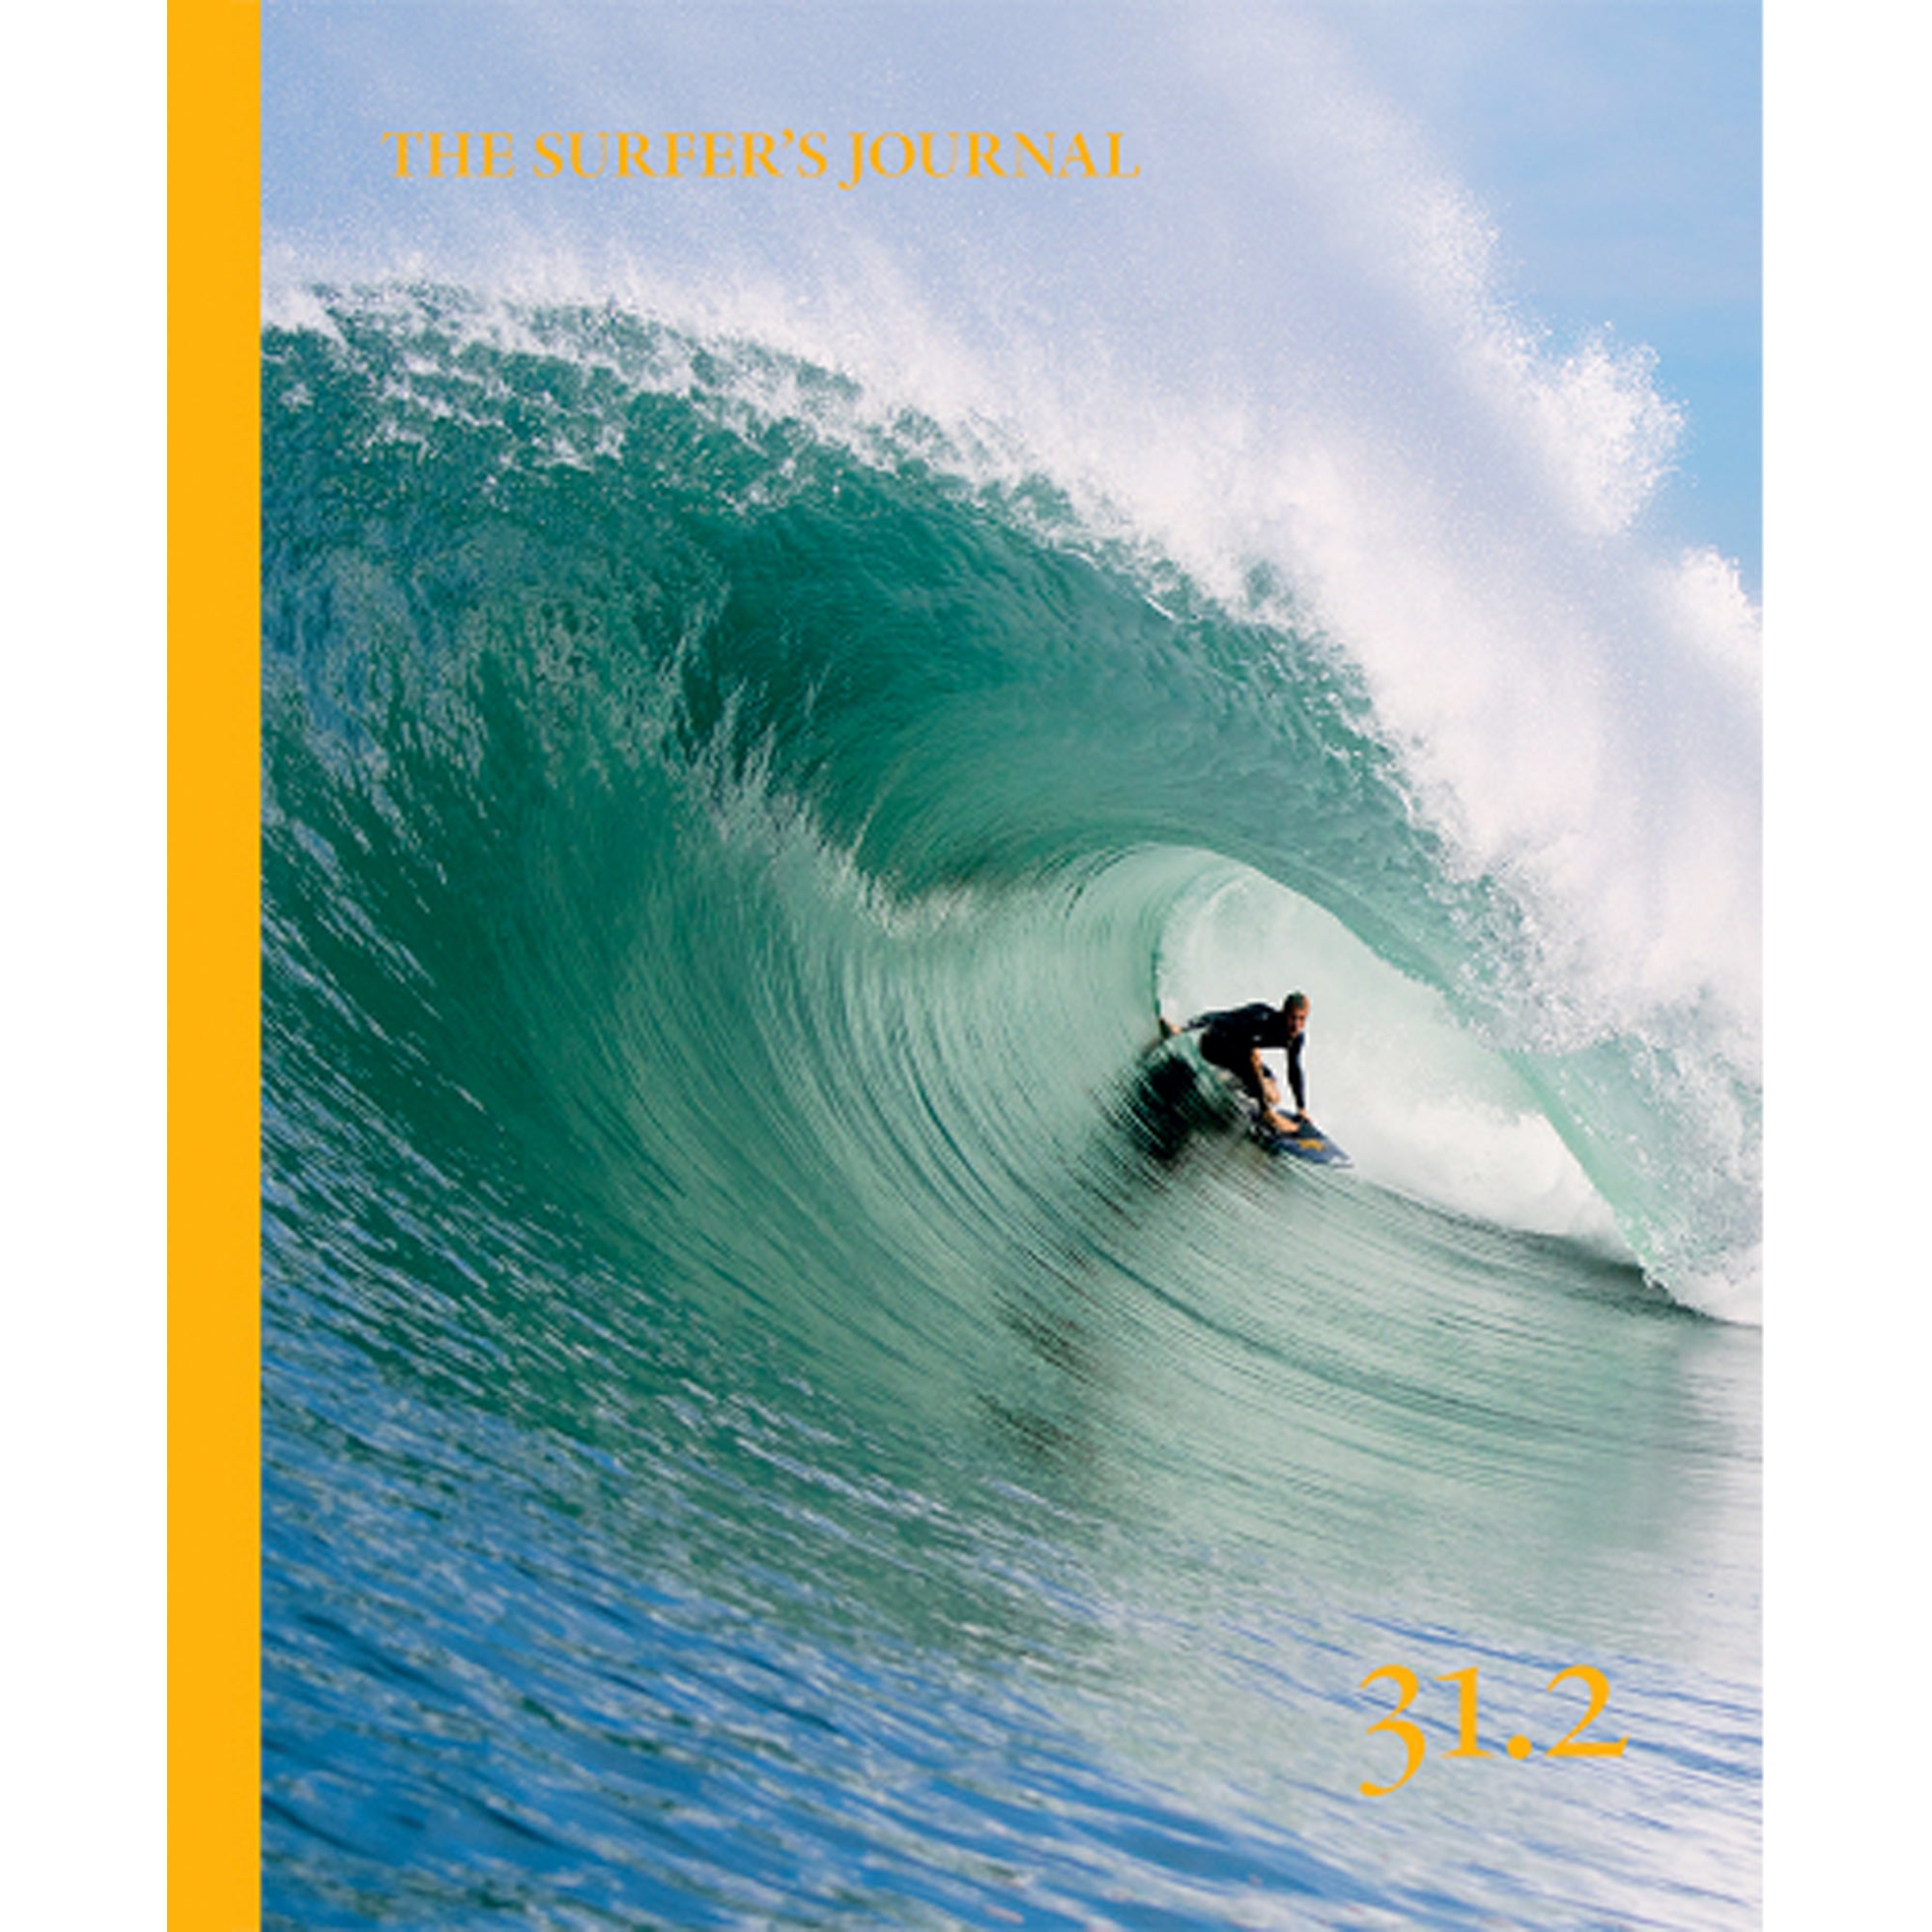 The Surfer's Journal #31.2